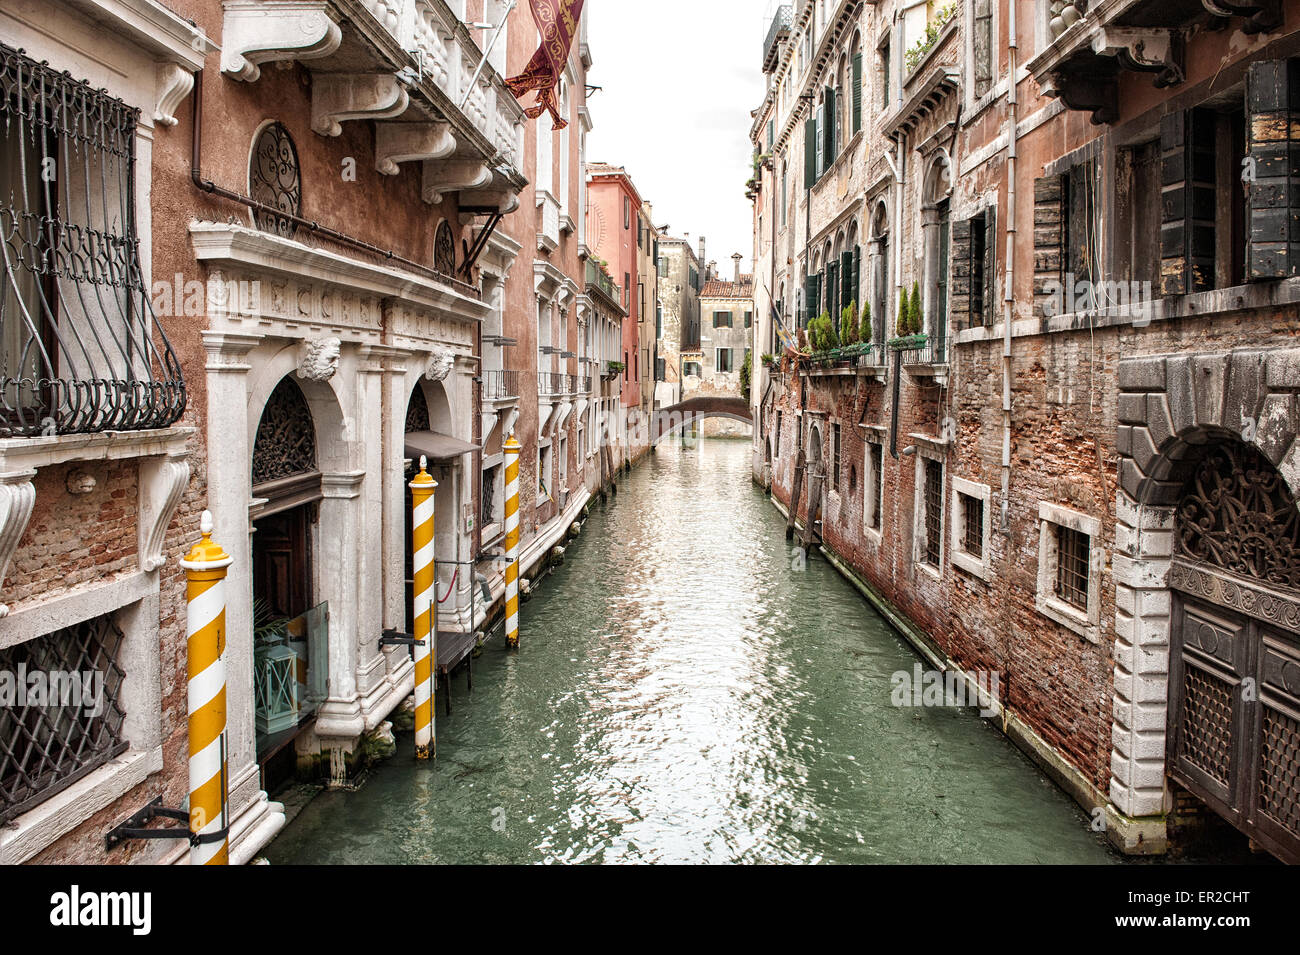 Narrow Canal Lined with Low Rise Buildings, Iconic Canal Scene in Venice, Italy Stock Photo